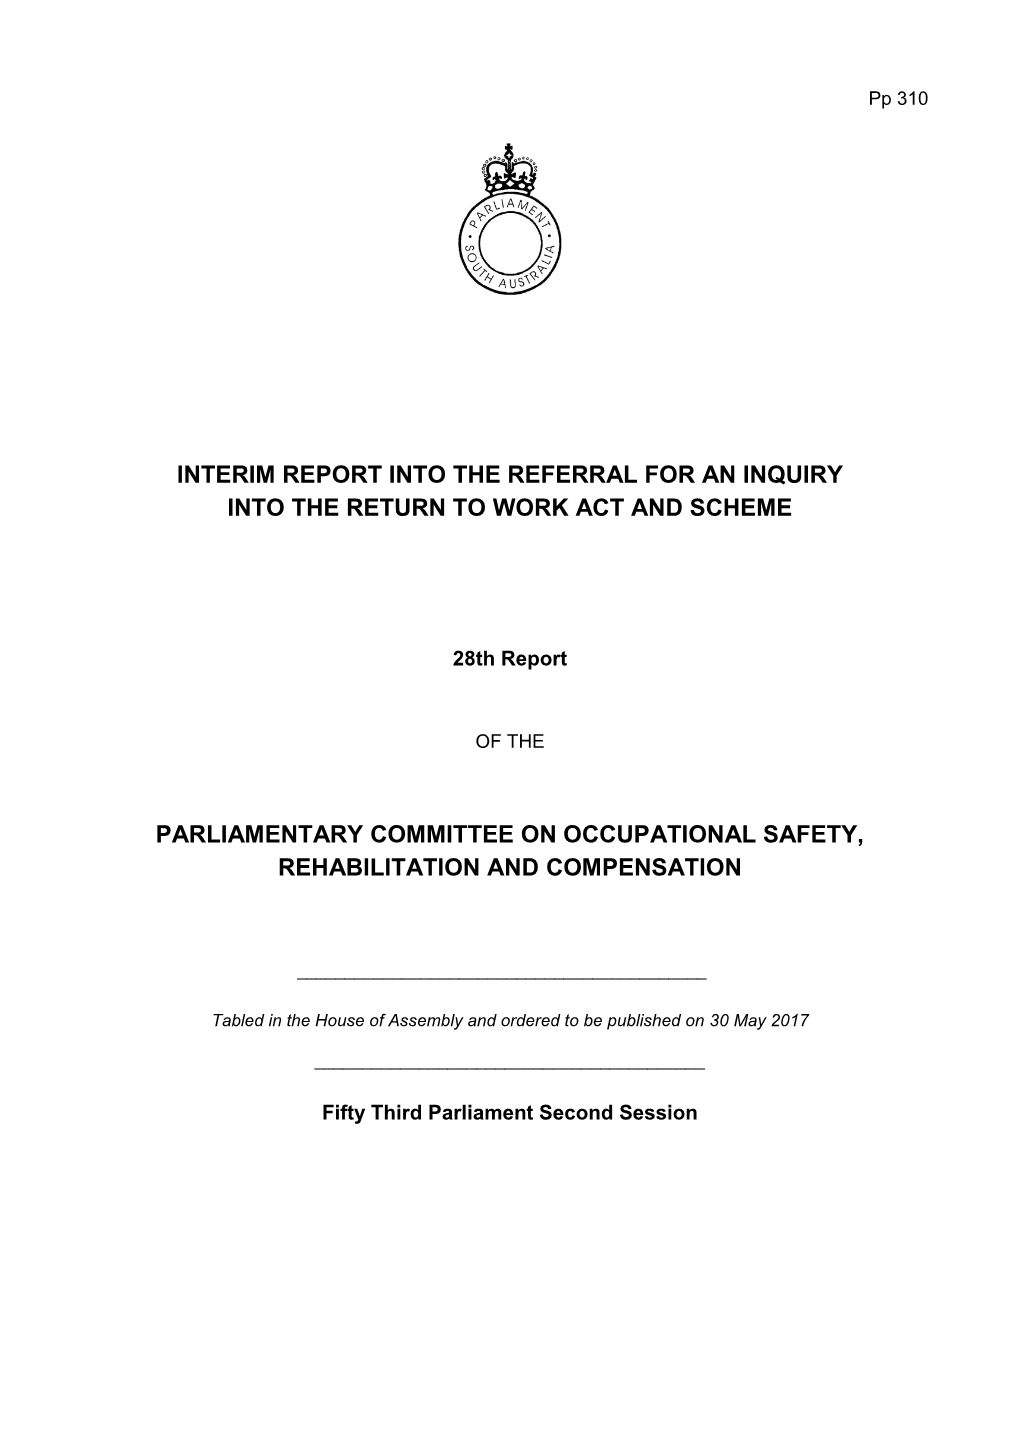 Interim Report Into the Referral for an Inquiry Into the Return to Work Act